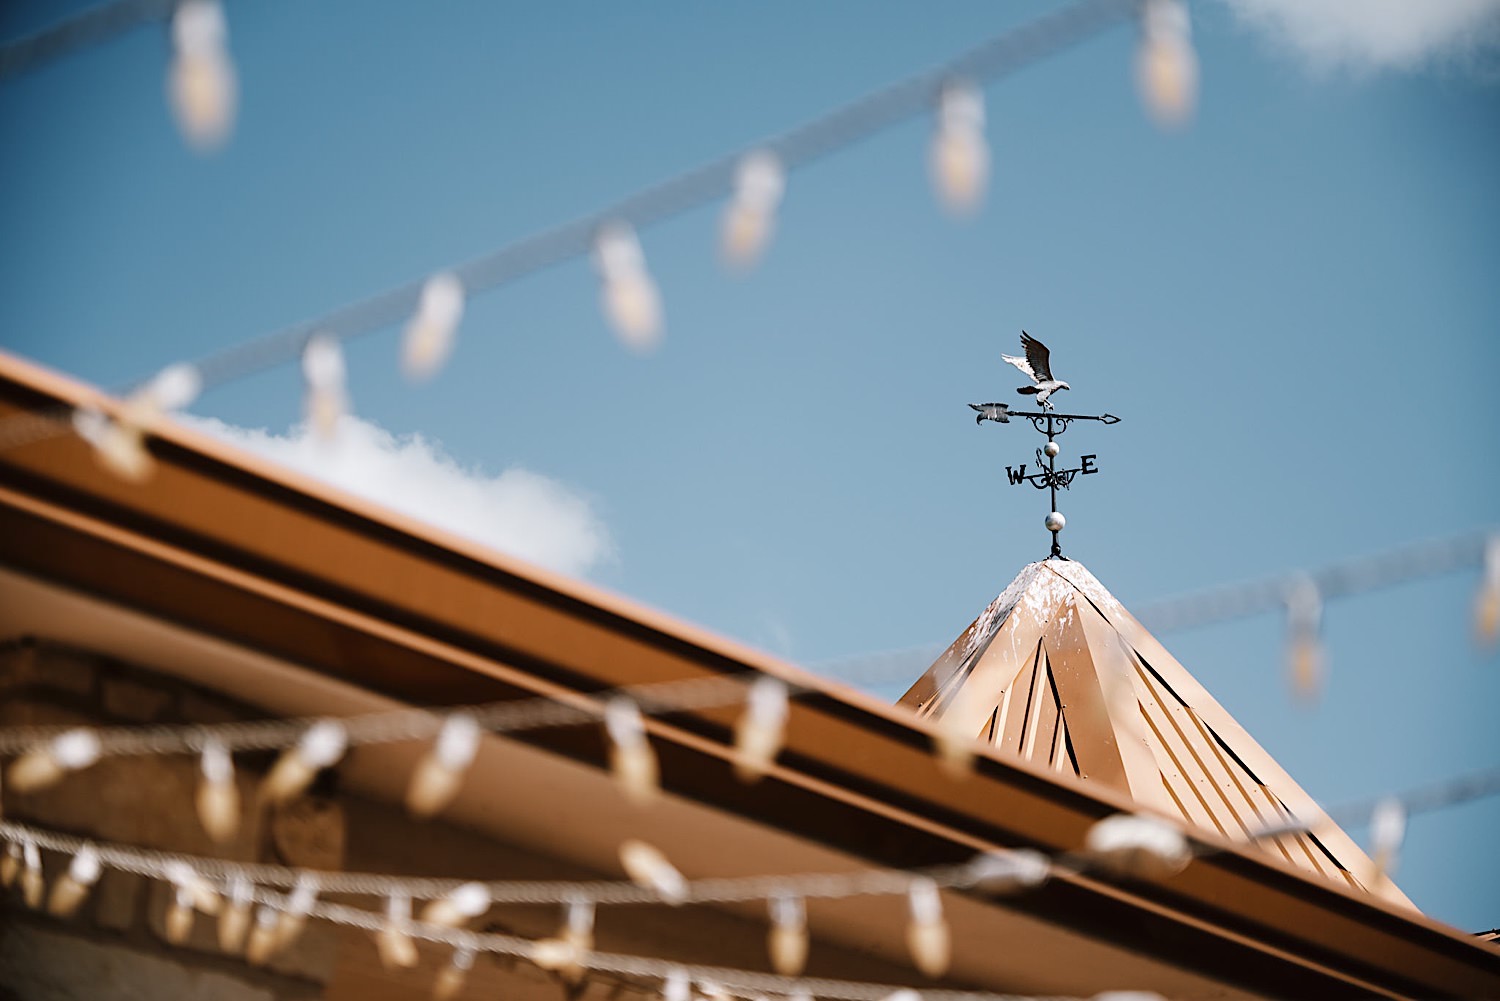 The weathervane of Smythwick Castle, a Texas Hill Country wedding venue perfect for intimate celebrations with character.